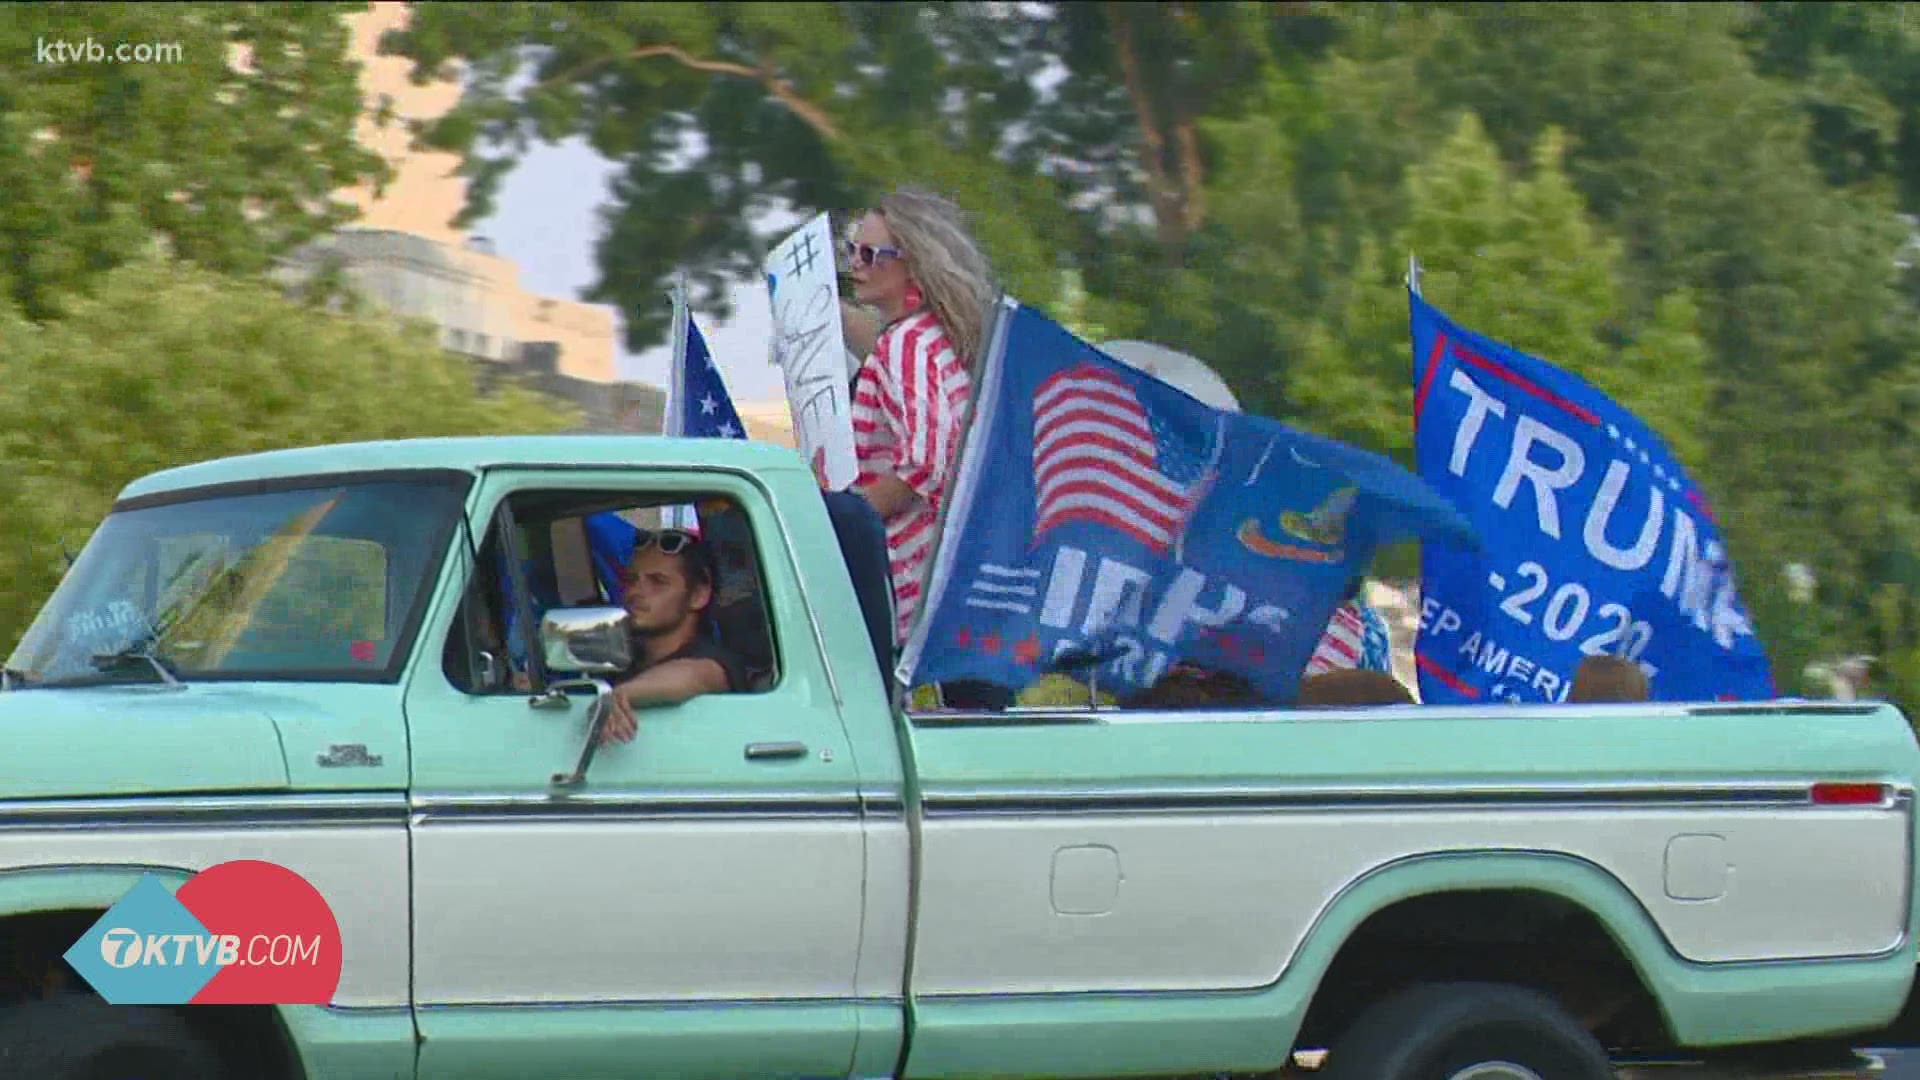 For the third time in recent months, supporters President Trump will be driving through downtown Boise in a parade of sorts as a part of a Trump cruise rally.